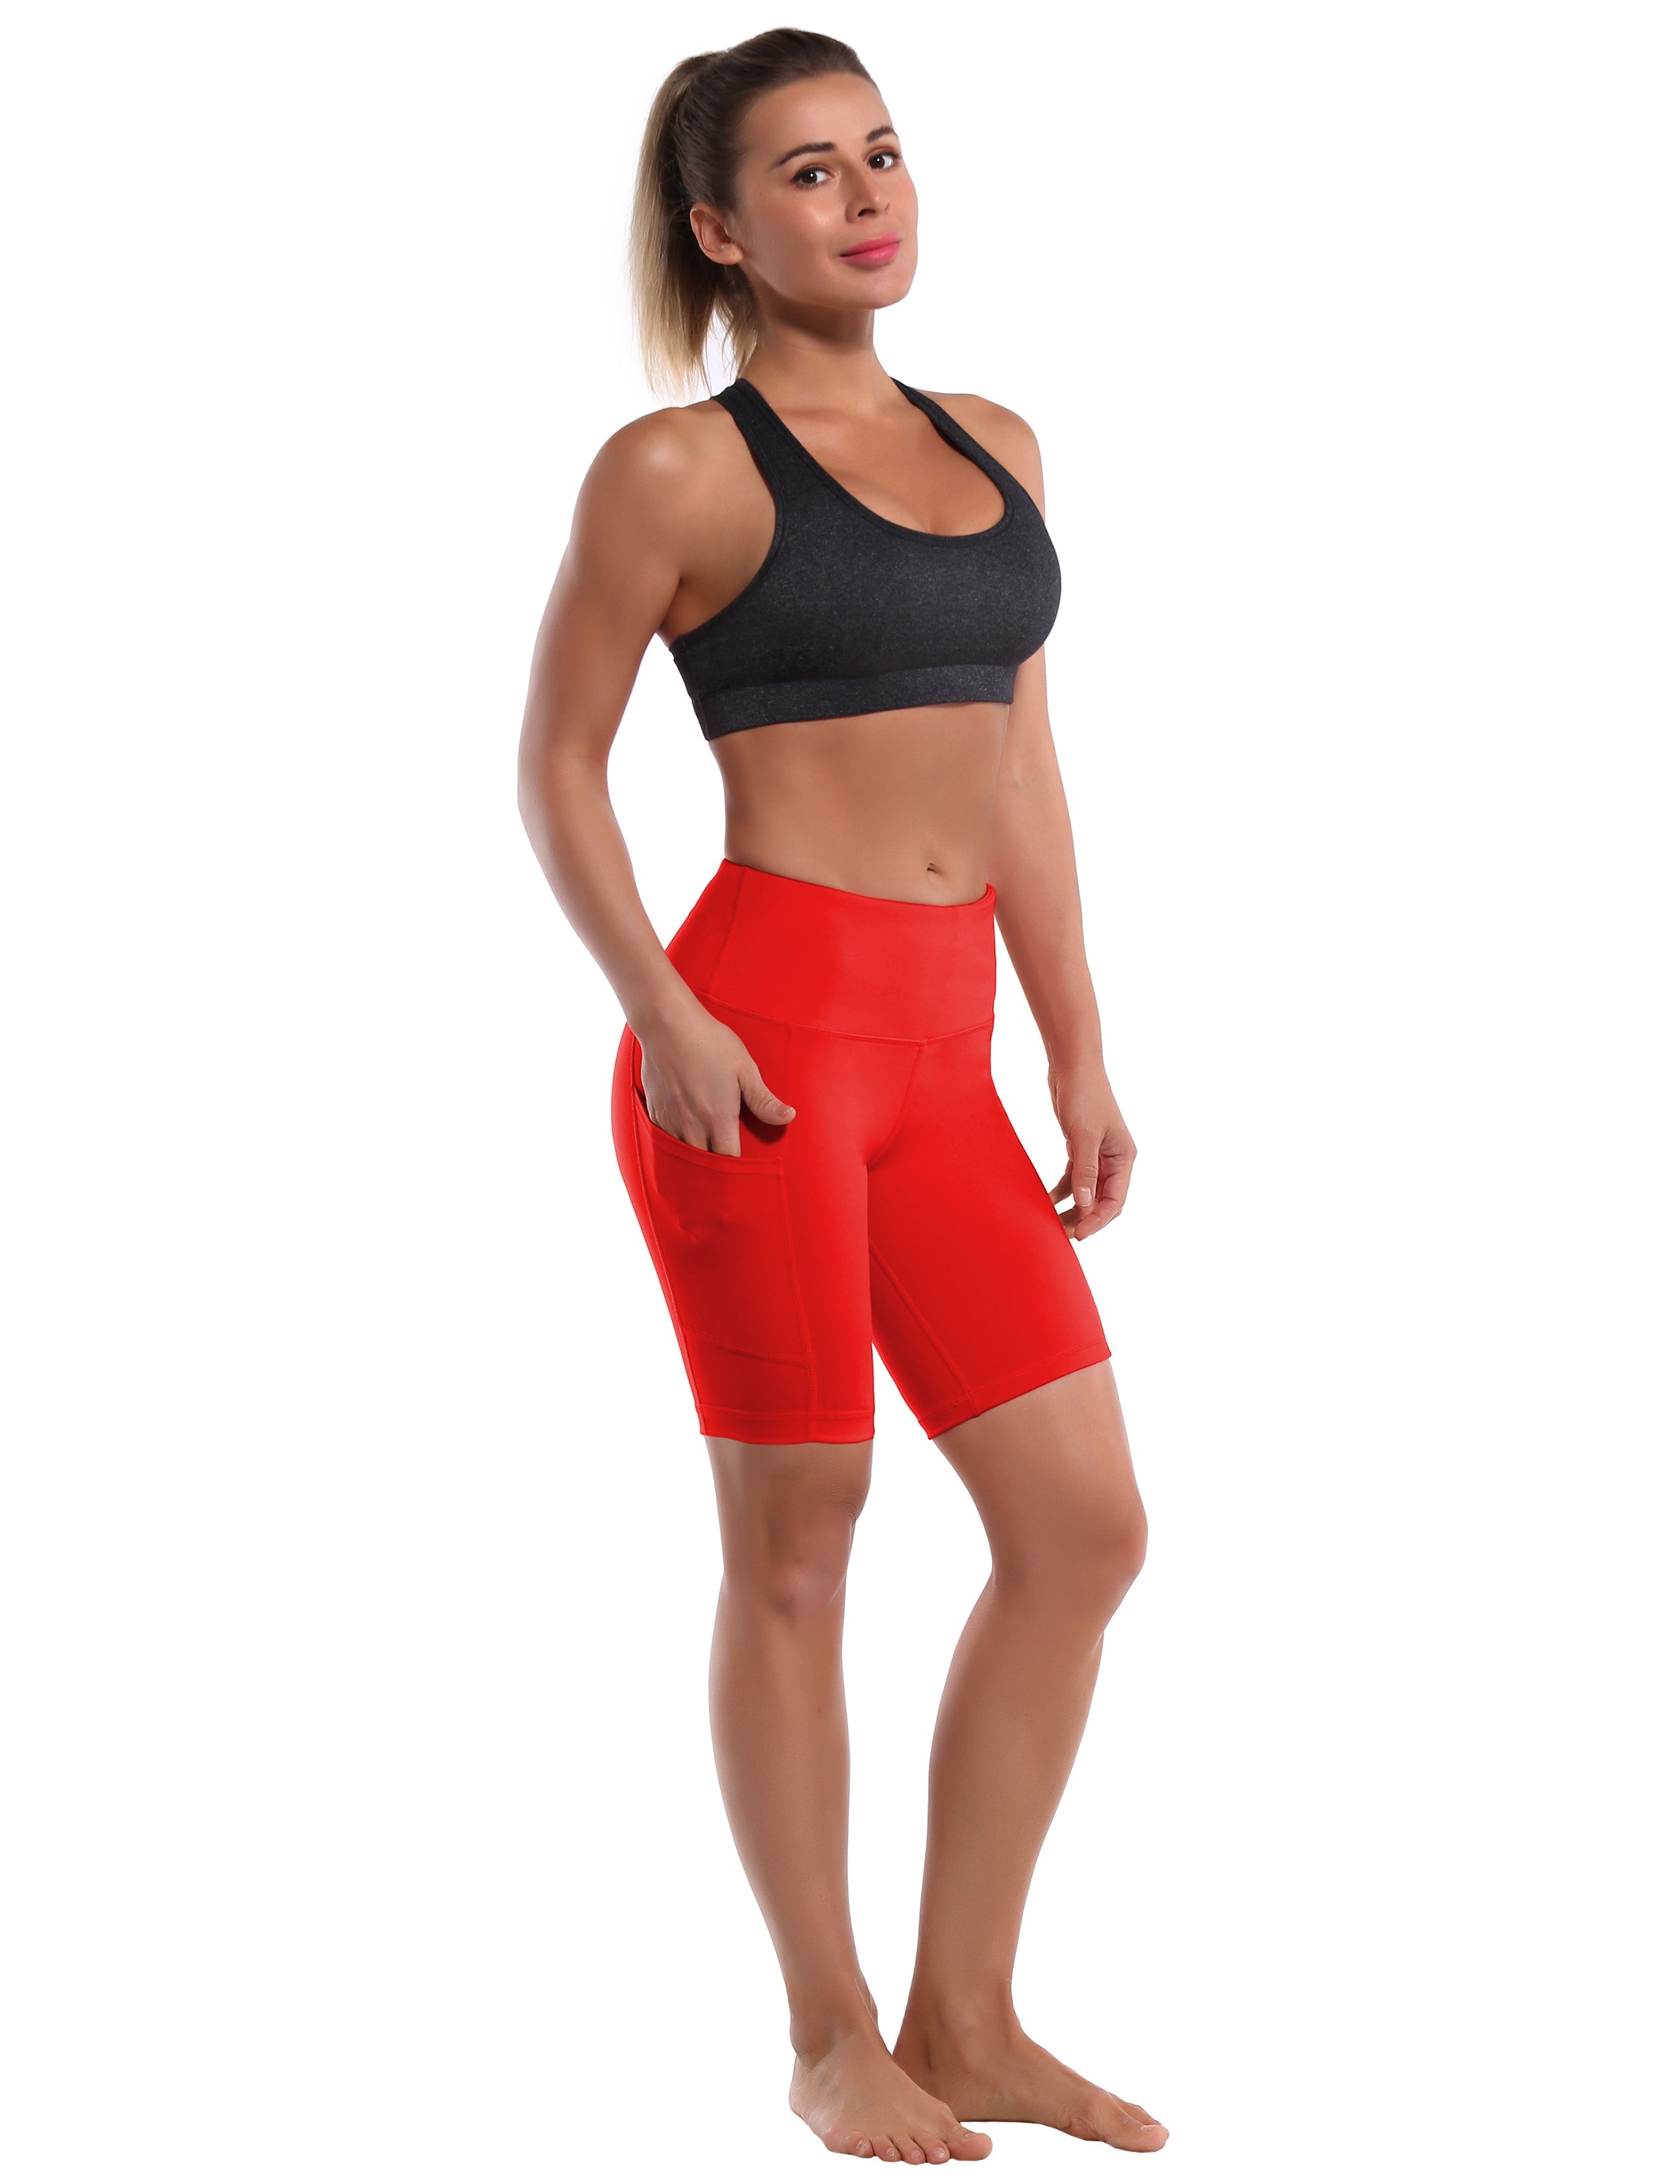 8" Side Pockets Yoga Shorts scarlet Sleek, soft, smooth and totally comfortable: our newest style is here. Softest-ever fabric High elasticity High density 4-way stretch Fabric doesn't attract lint easily No see-through Moisture-wicking Machine wash 75% Nylon, 25% Spandex